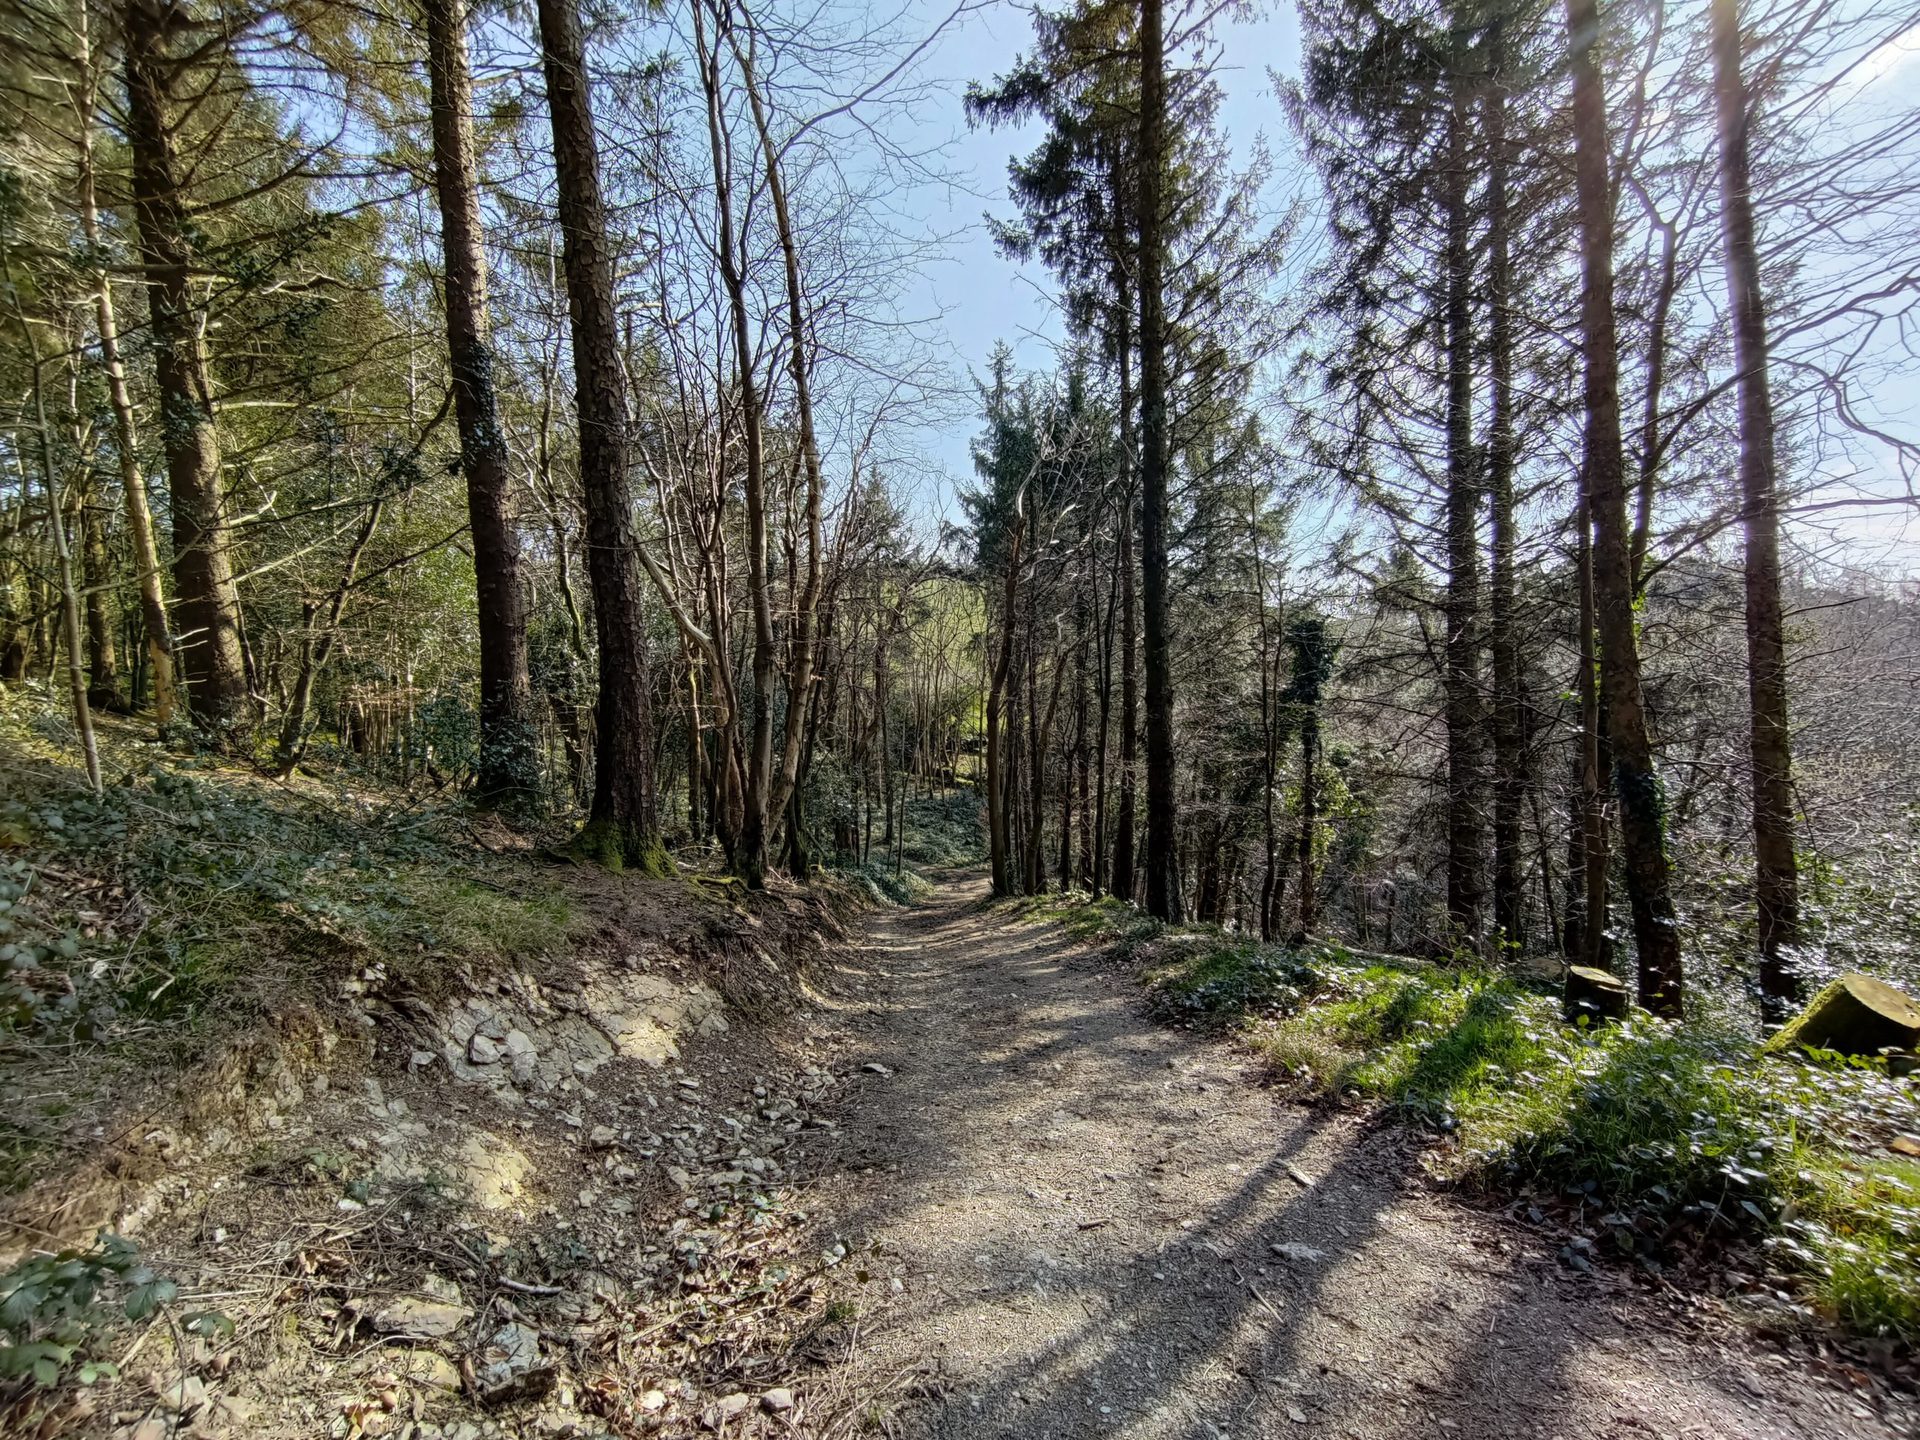 ROG Phone 5 ultra wide camera sample of a forest